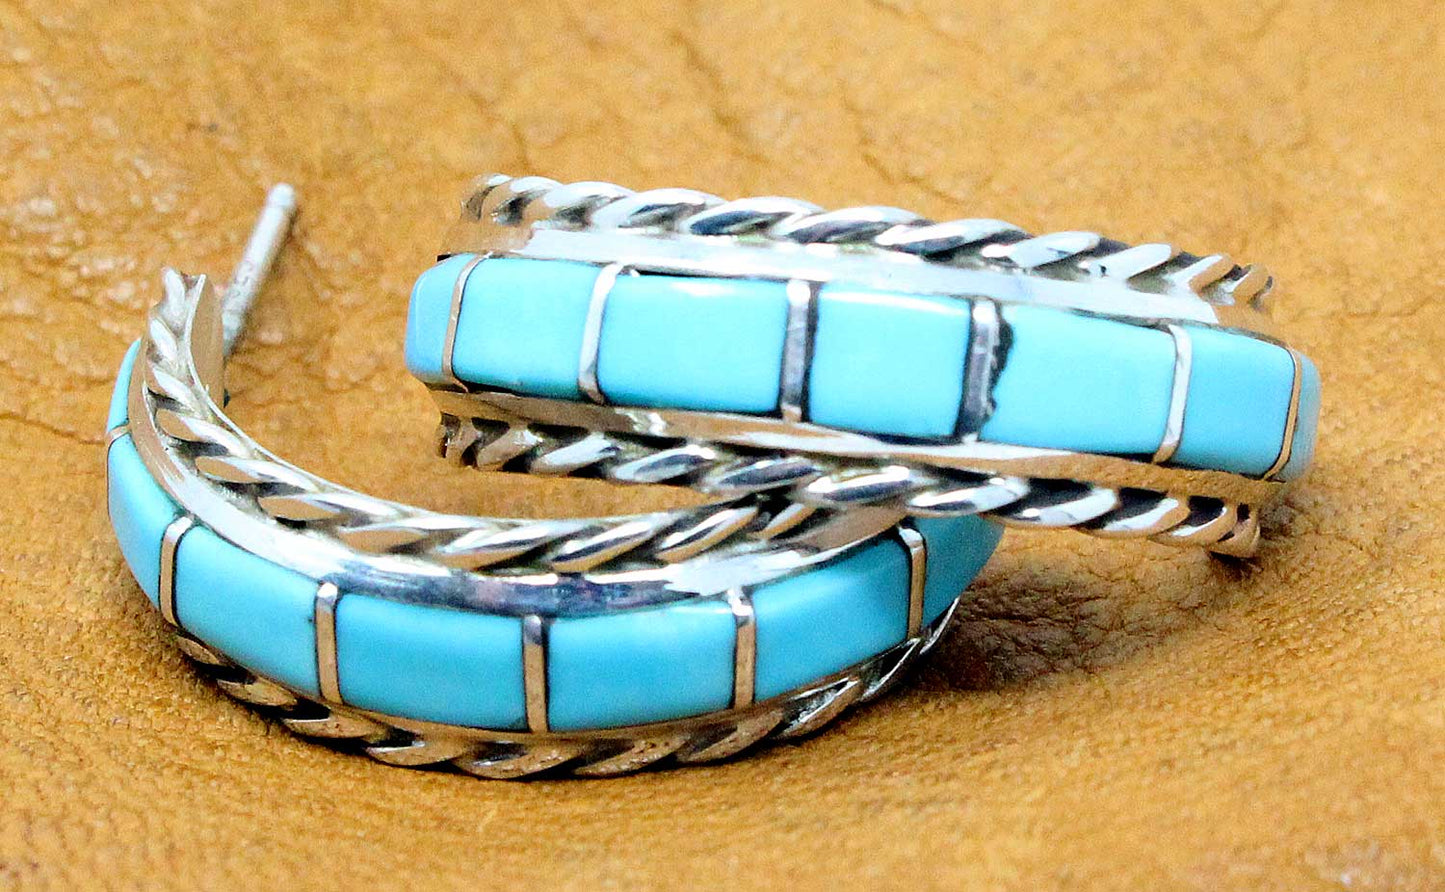 Load image into Gallery viewer, Zuni Turquoise Hoop Earrings by Chavez
